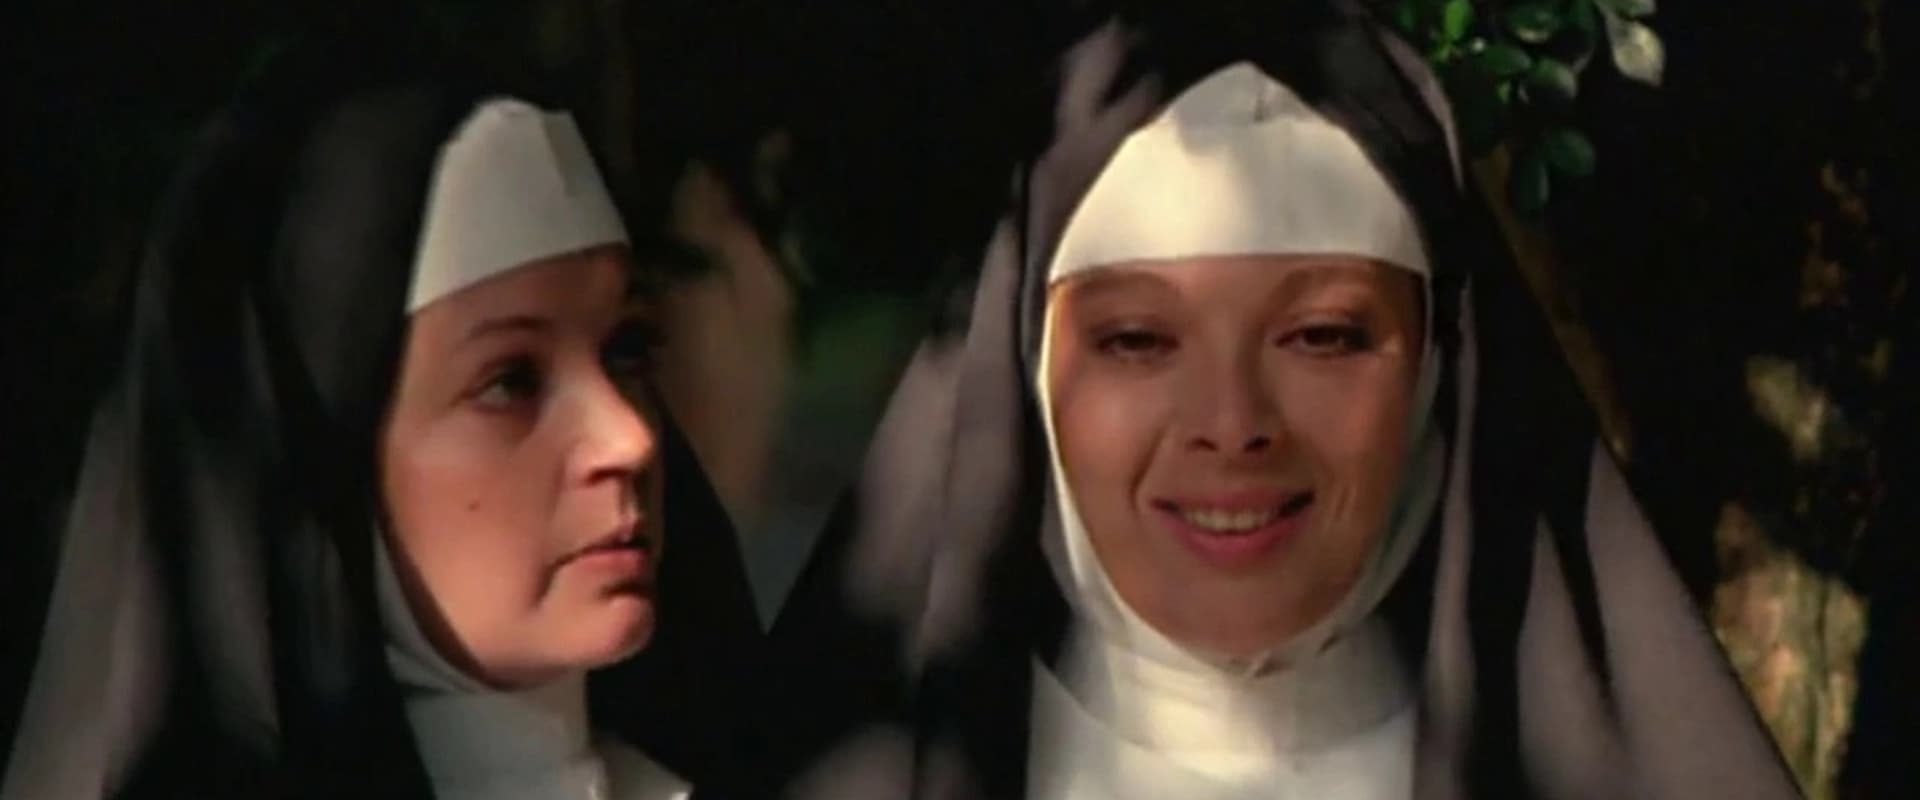 The Nun and the Torture